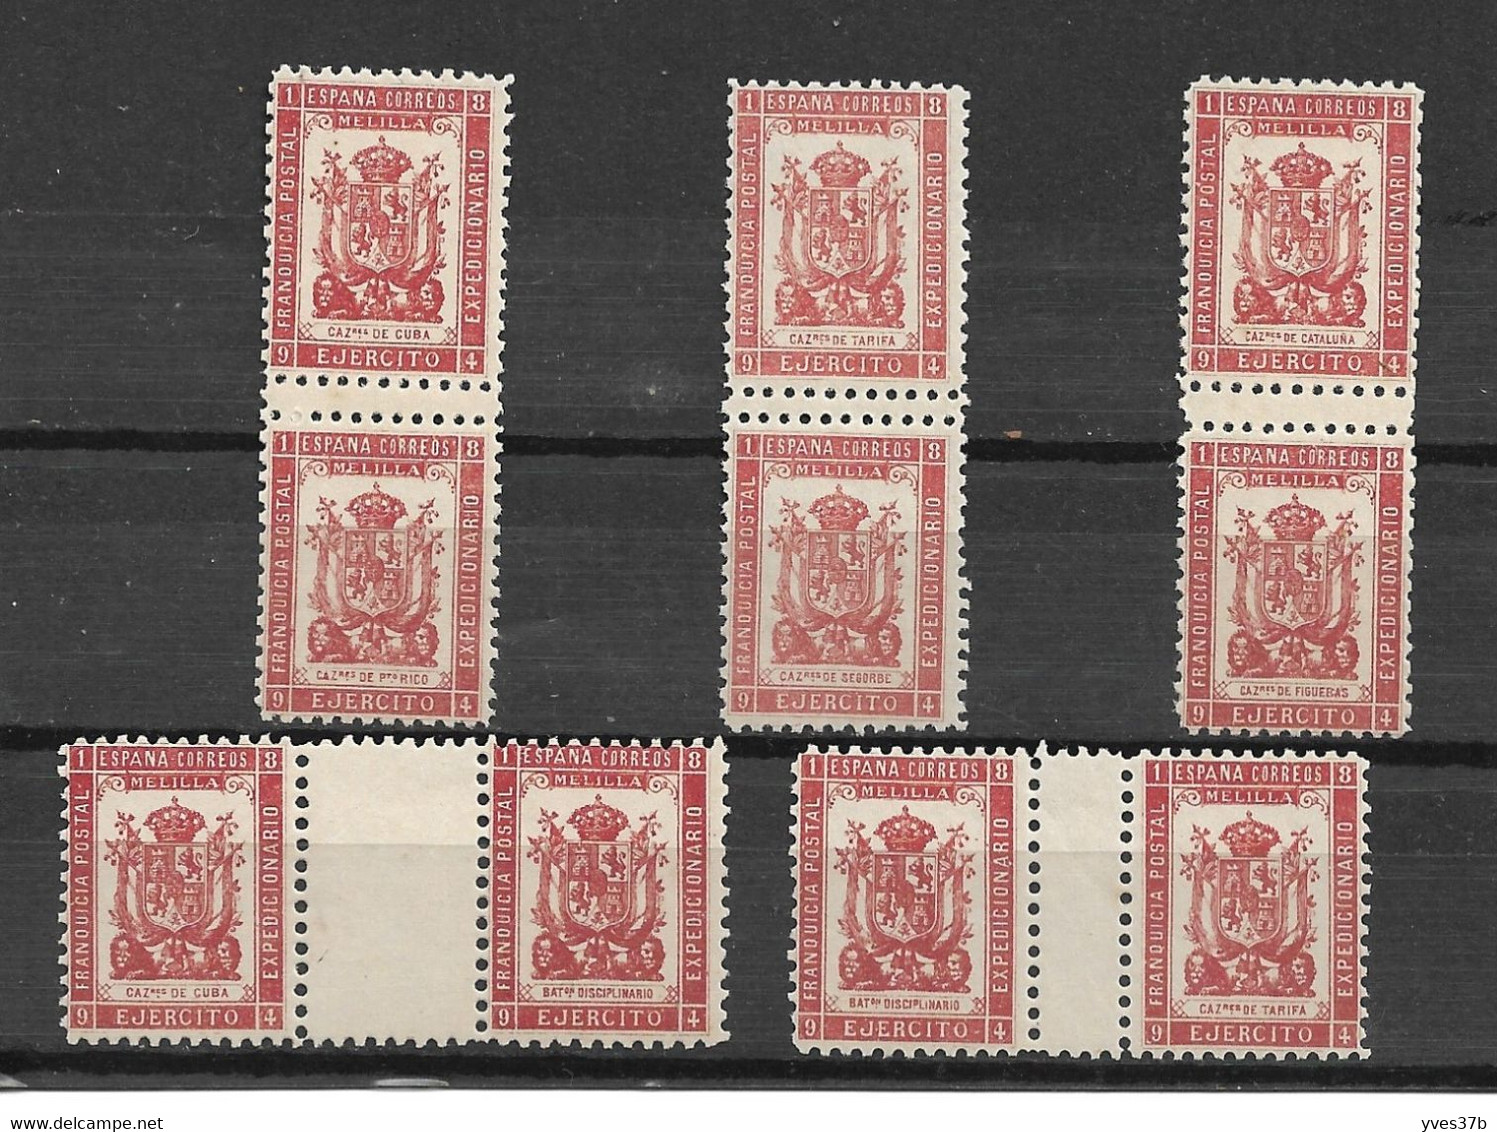 ESPAGNE - MELILLA 1894 - Paires Inter-panneaux N°23+25, 26+28, 21+24, 23+37, 28+37 - Neuf** - SUP - - Military Service Stamp